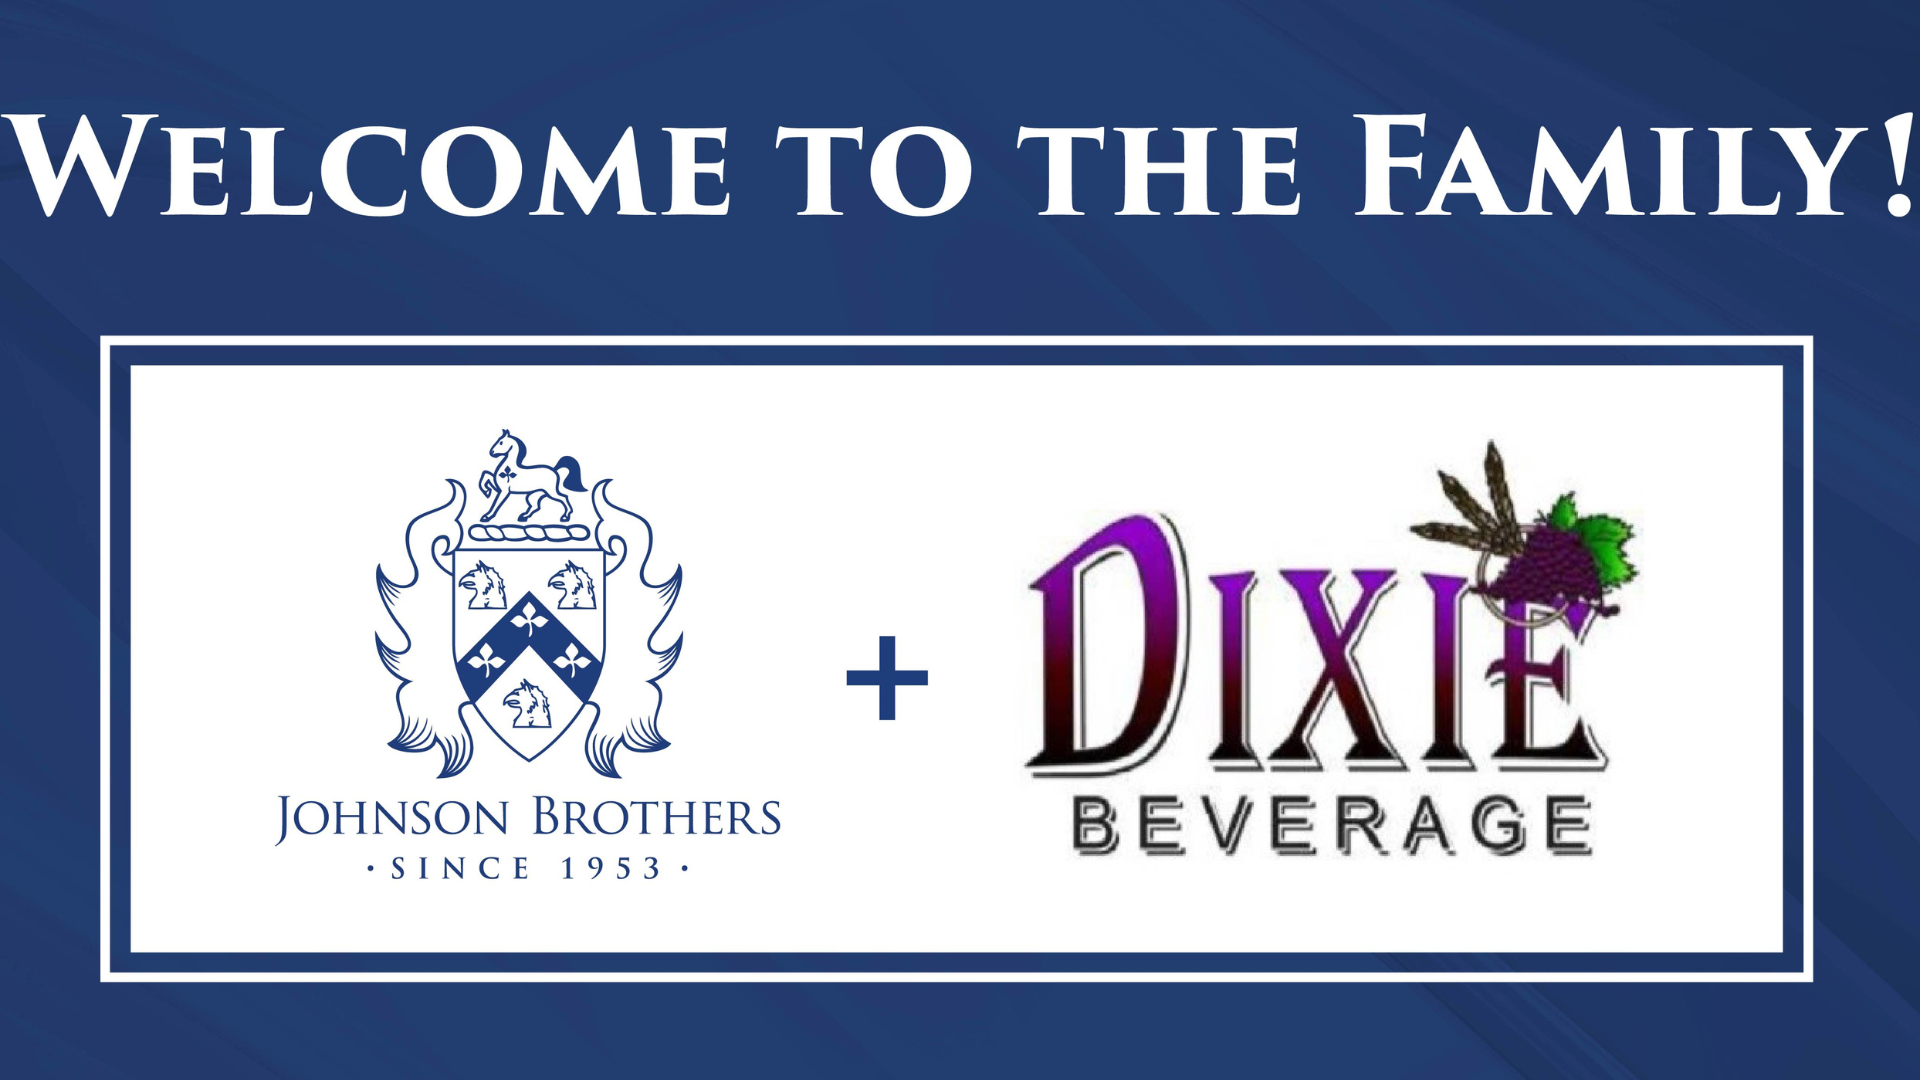 Johnson Brothers Acquiring Wine and Beer Distribution Business of Dixie Beverage Company